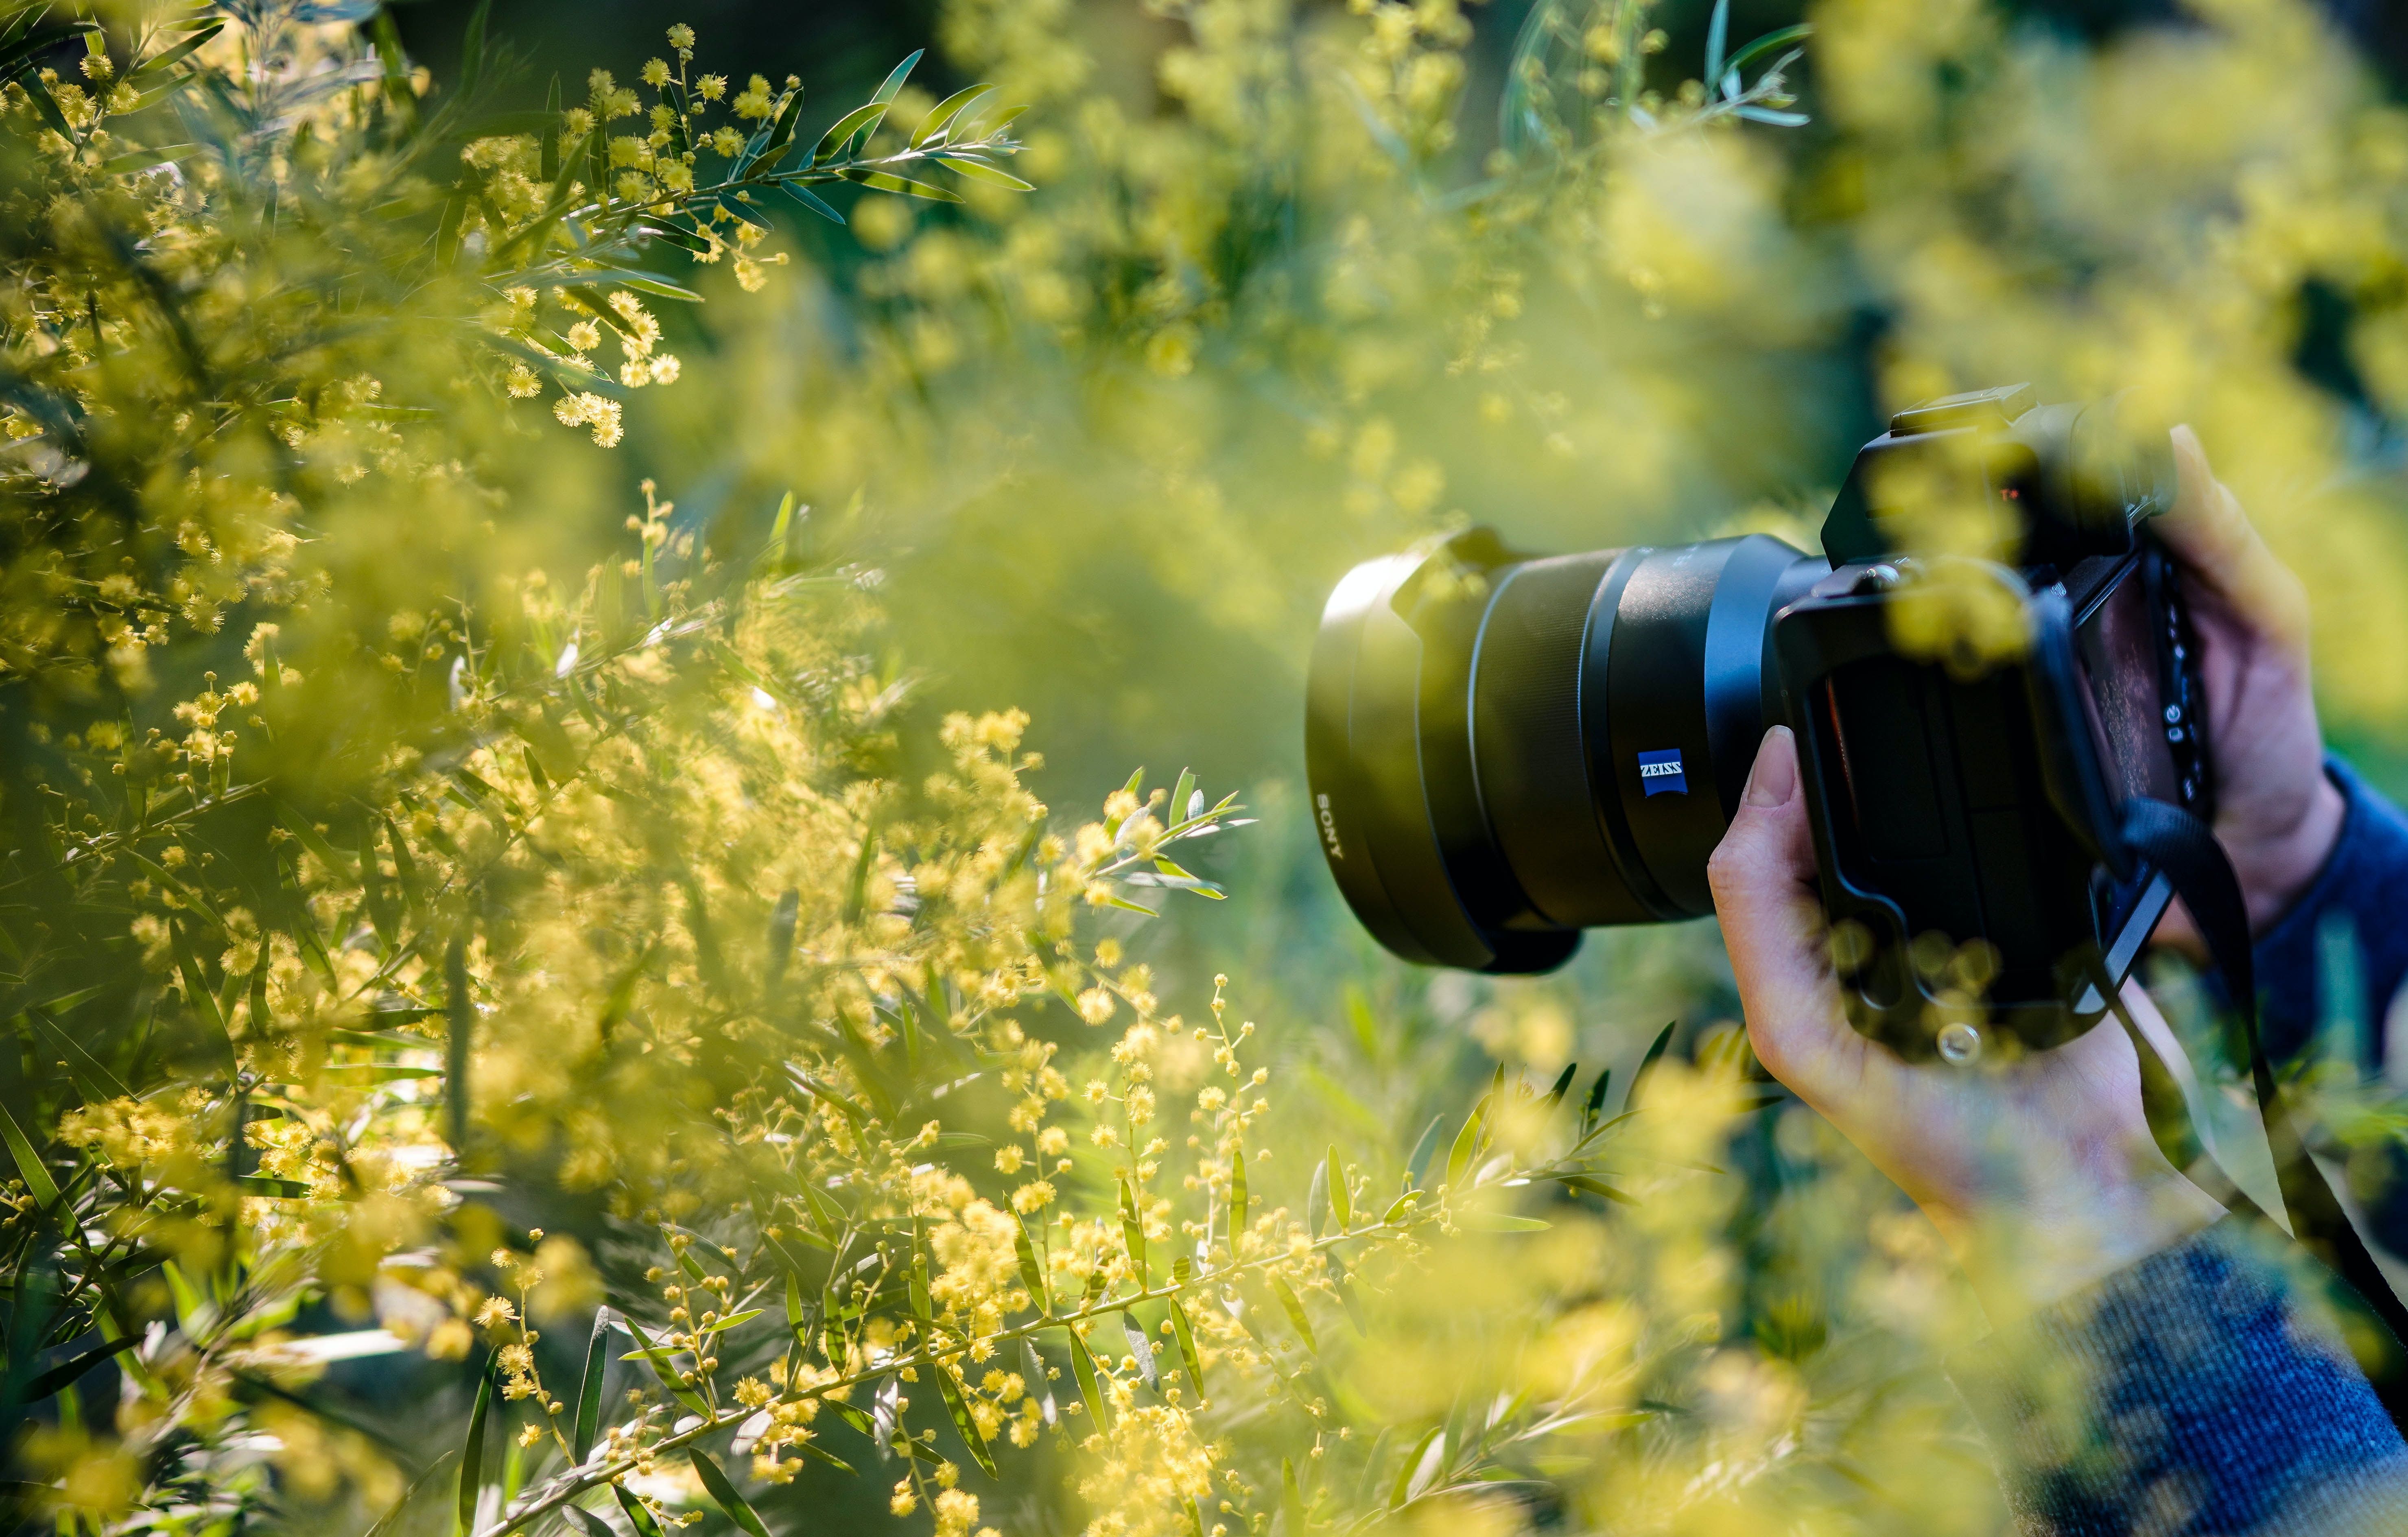 A person taking a photo of some greenery.